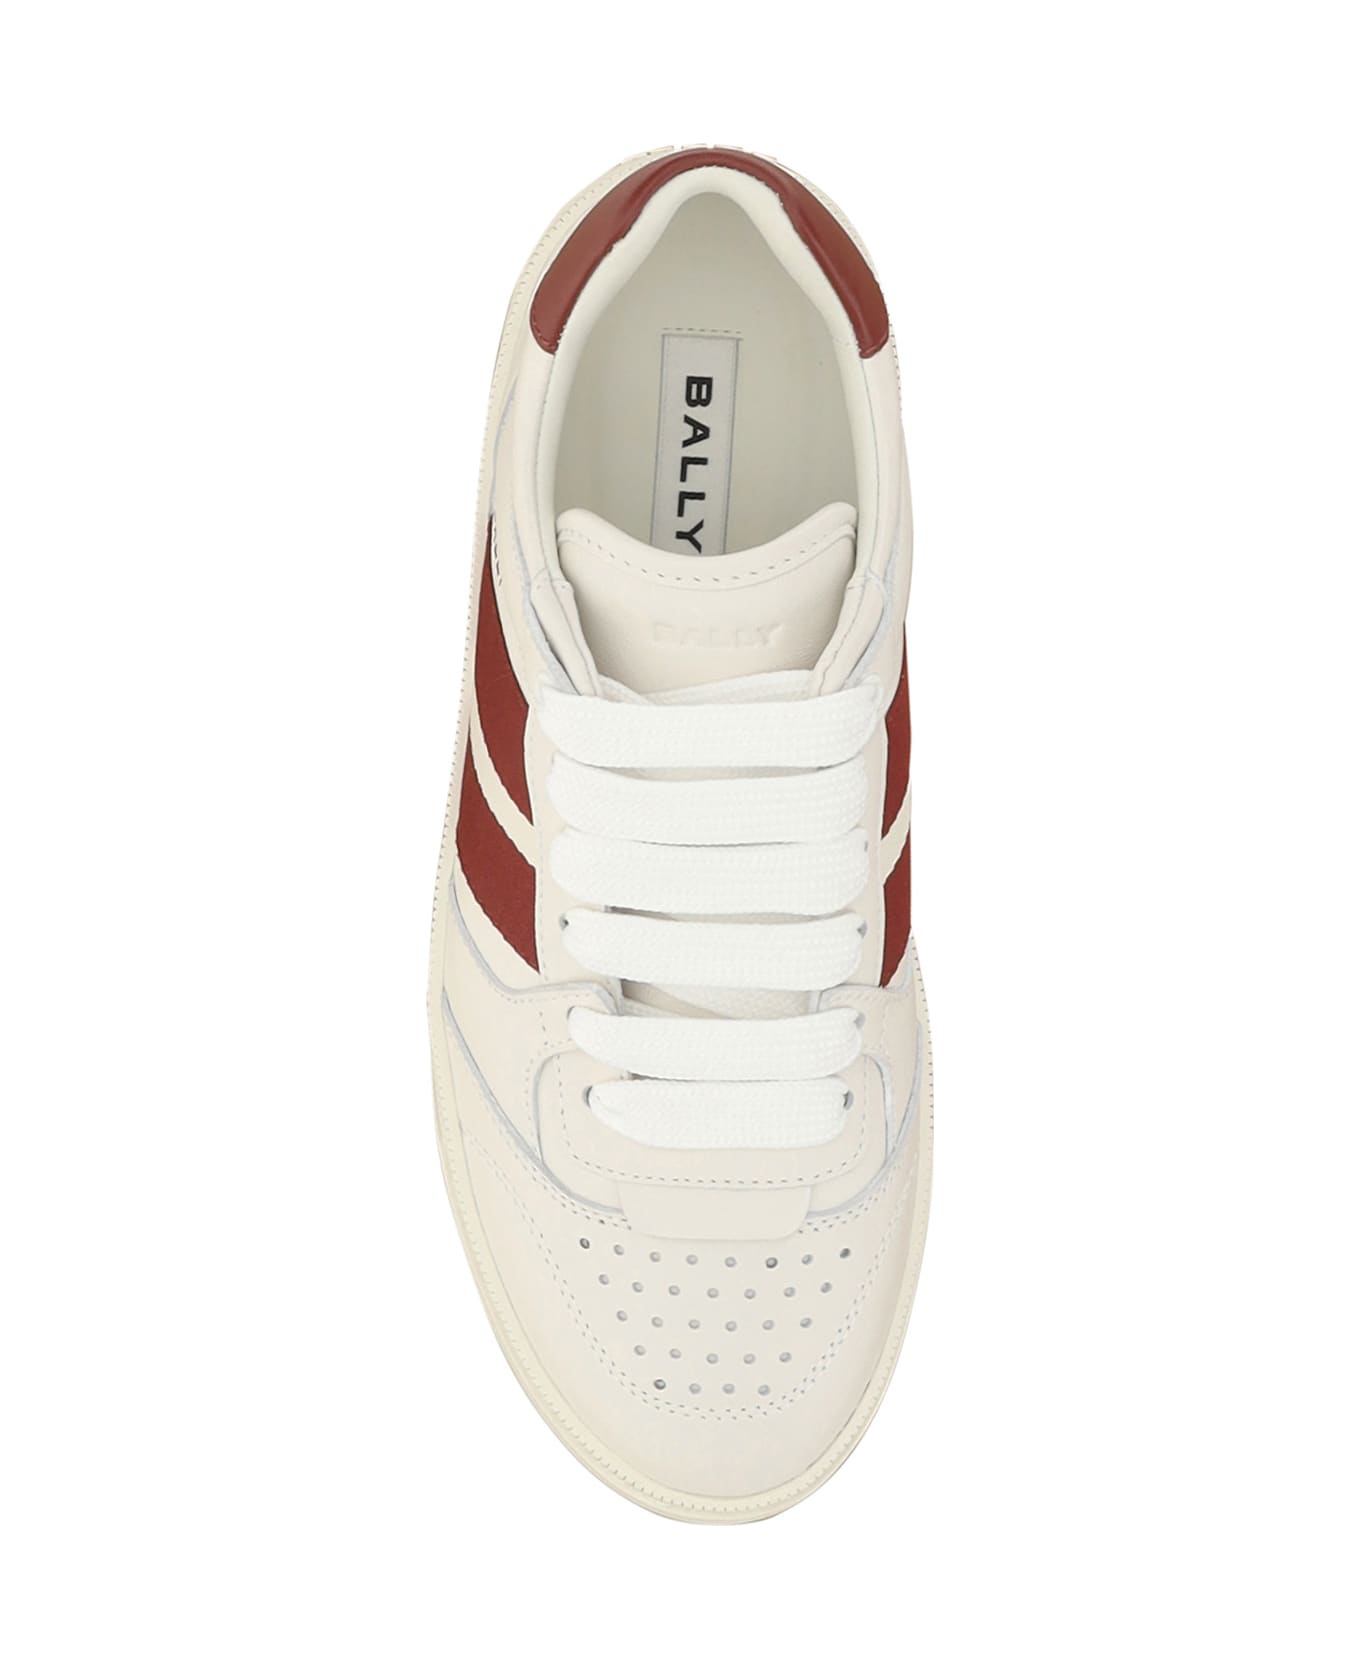 Bally Rebby-w Sneakers - Red スニーカー